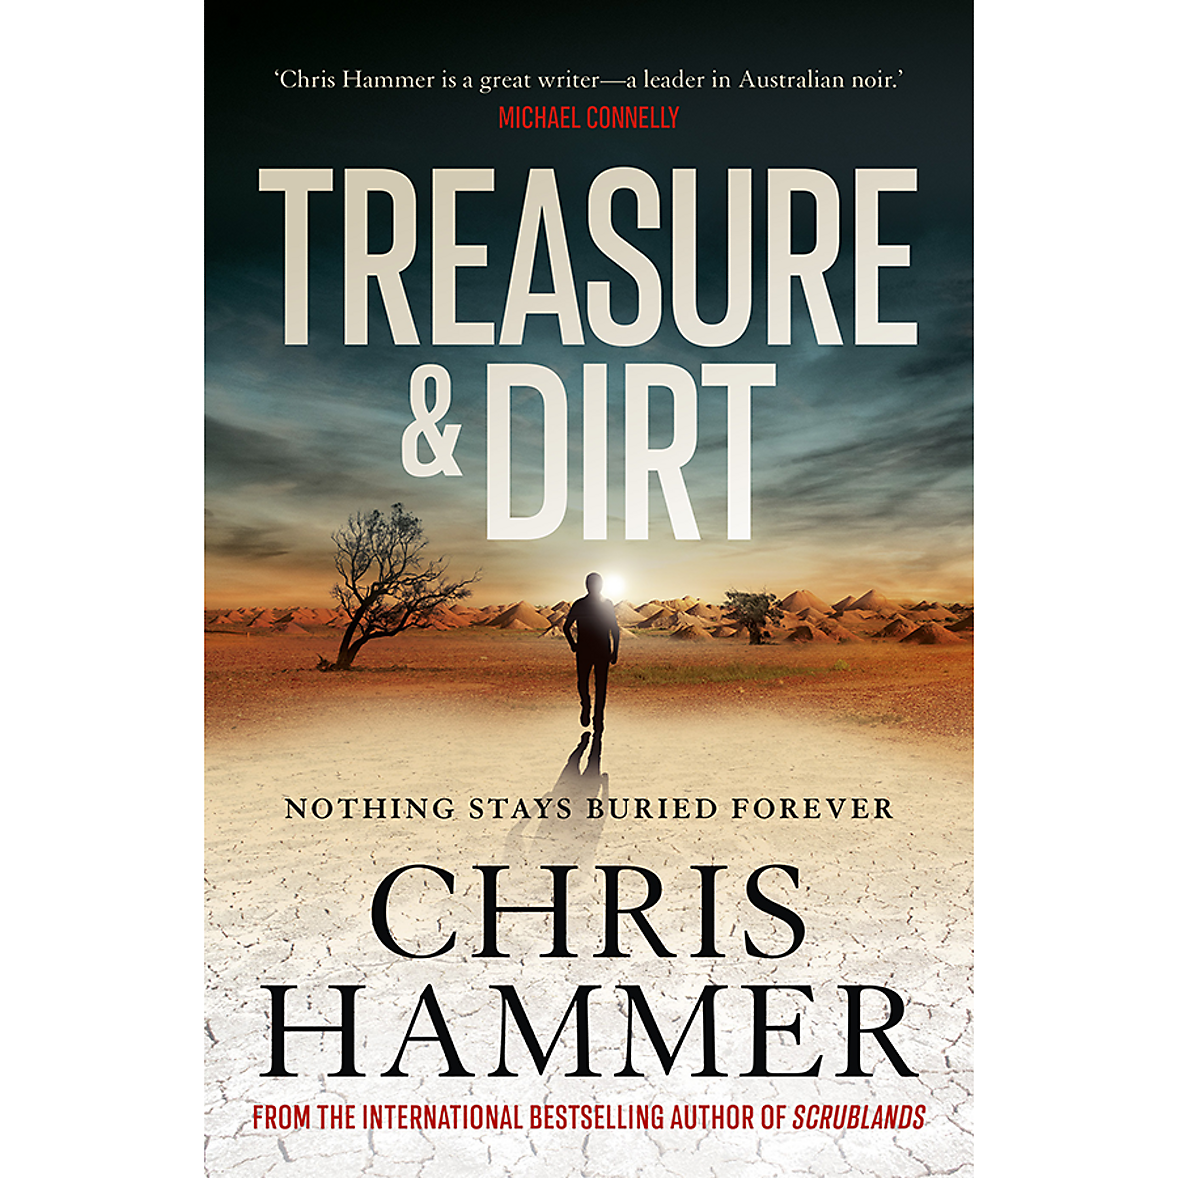 Treasure and Dirt by Chris Hammer